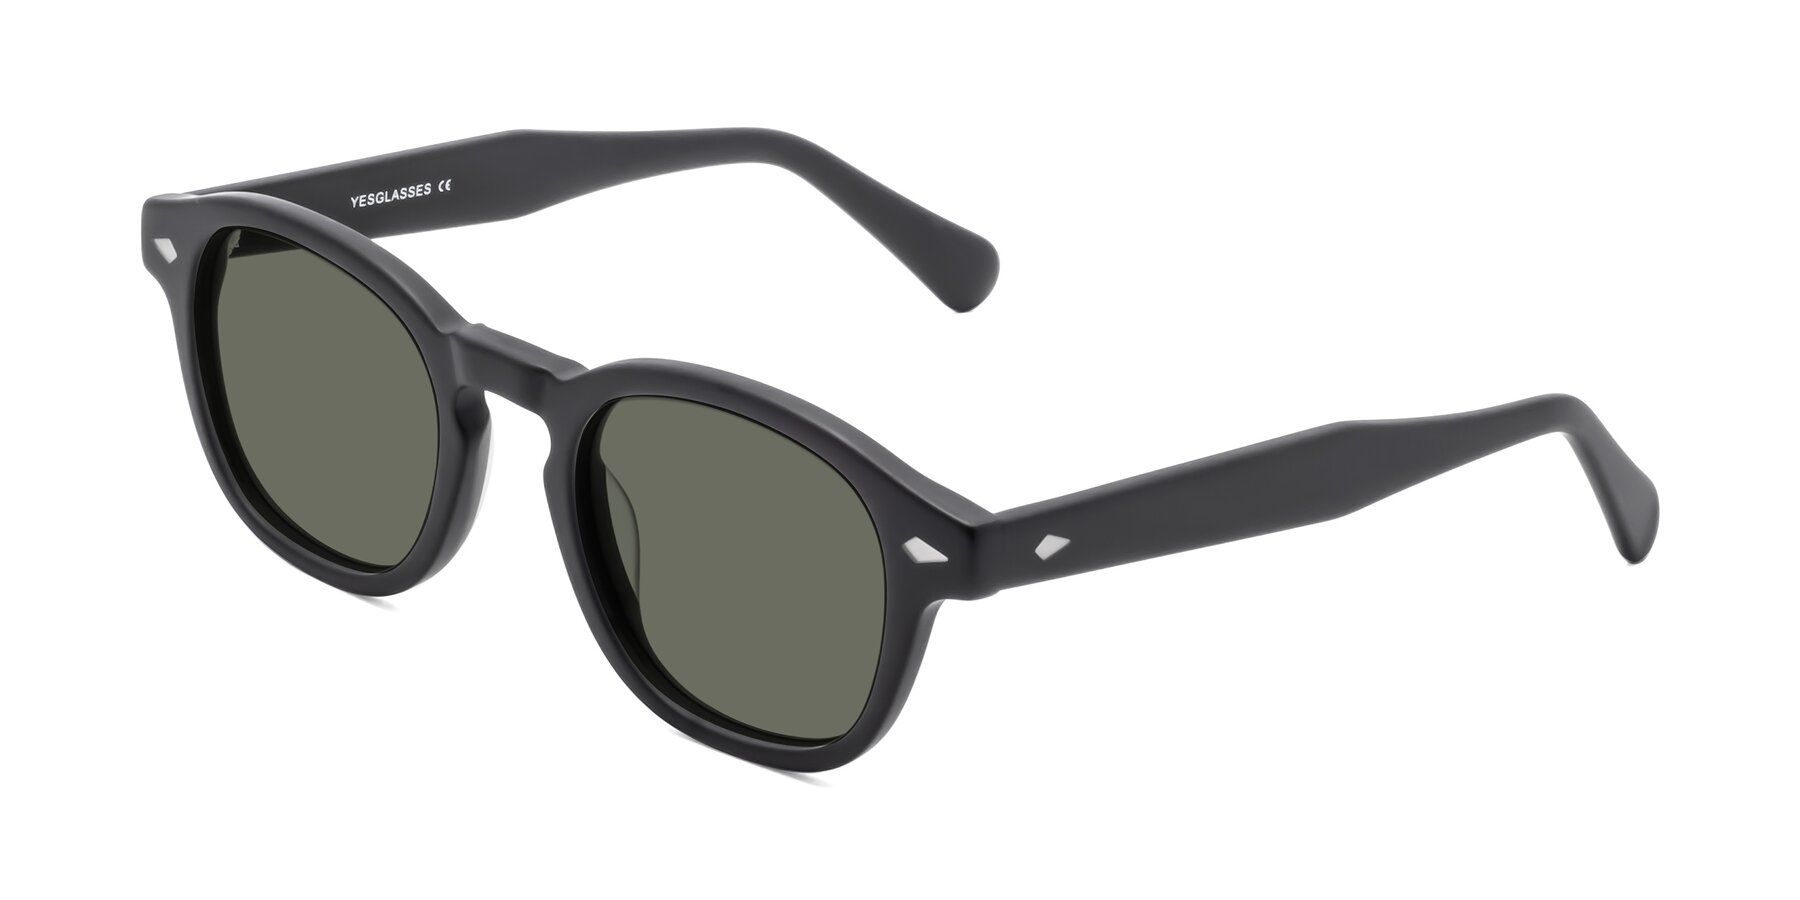 Angle of WALL-E in Matte Black with Gray Polarized Lenses